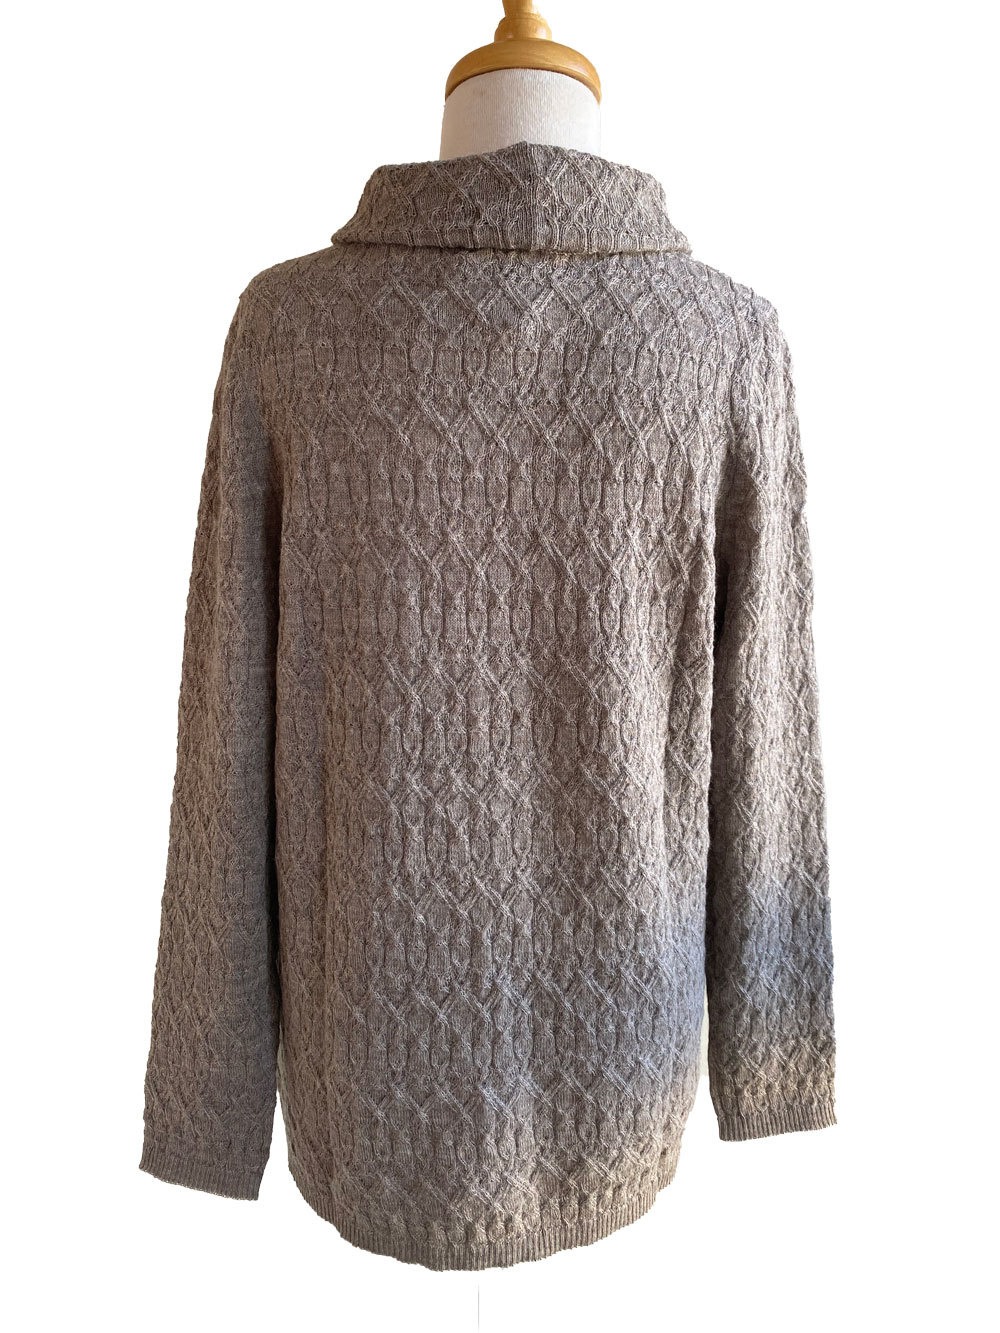 Sienna Cable Sweater - Taupe - 2